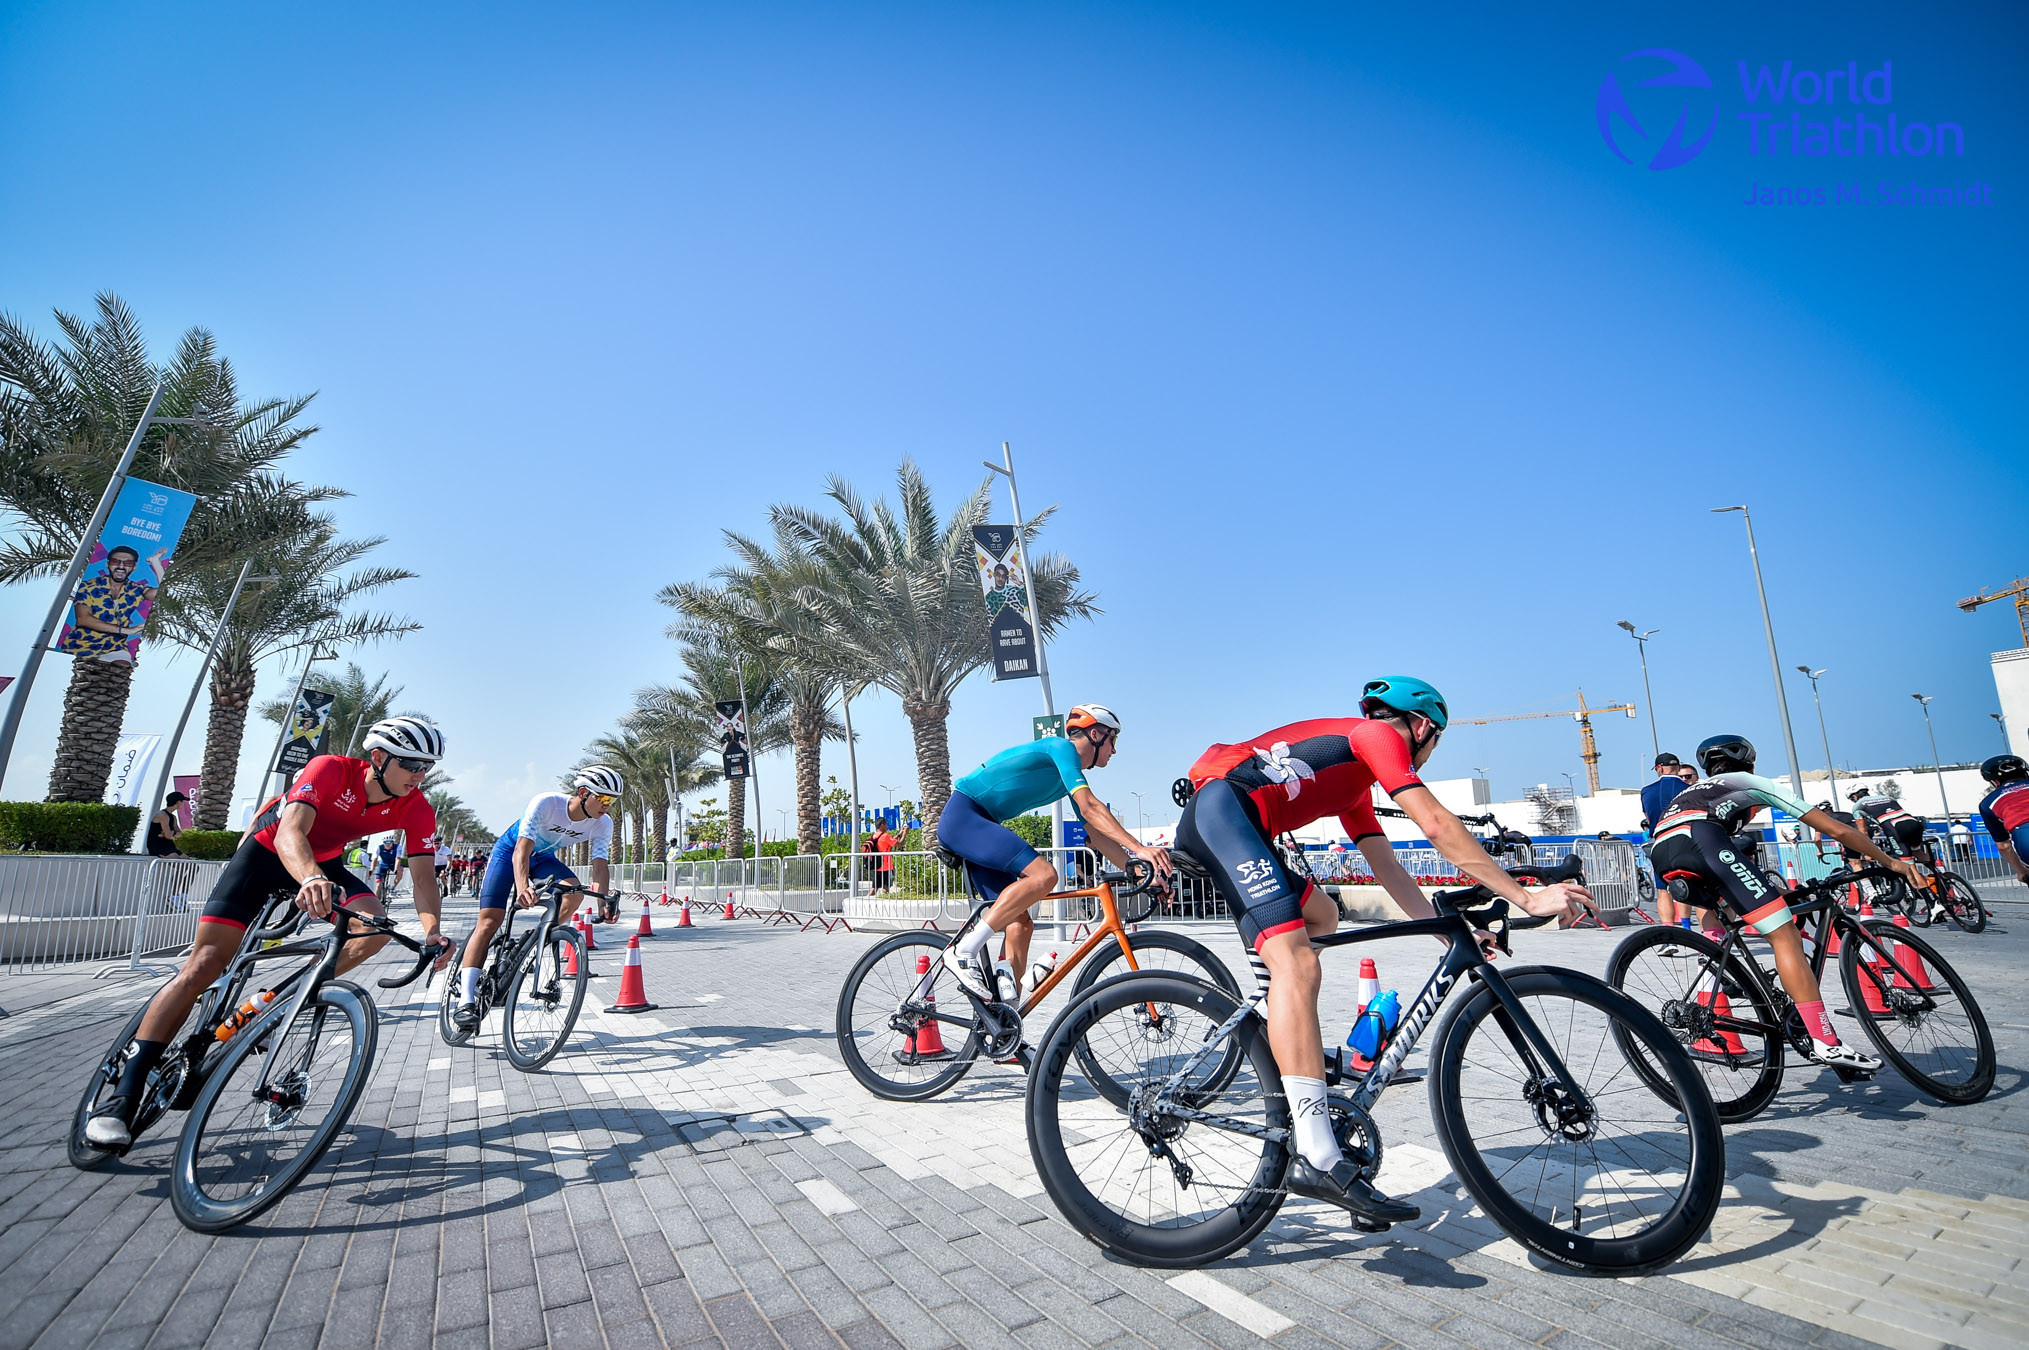 Titles to be decided at World Triathlon Championship Finals in Abu Dhabi